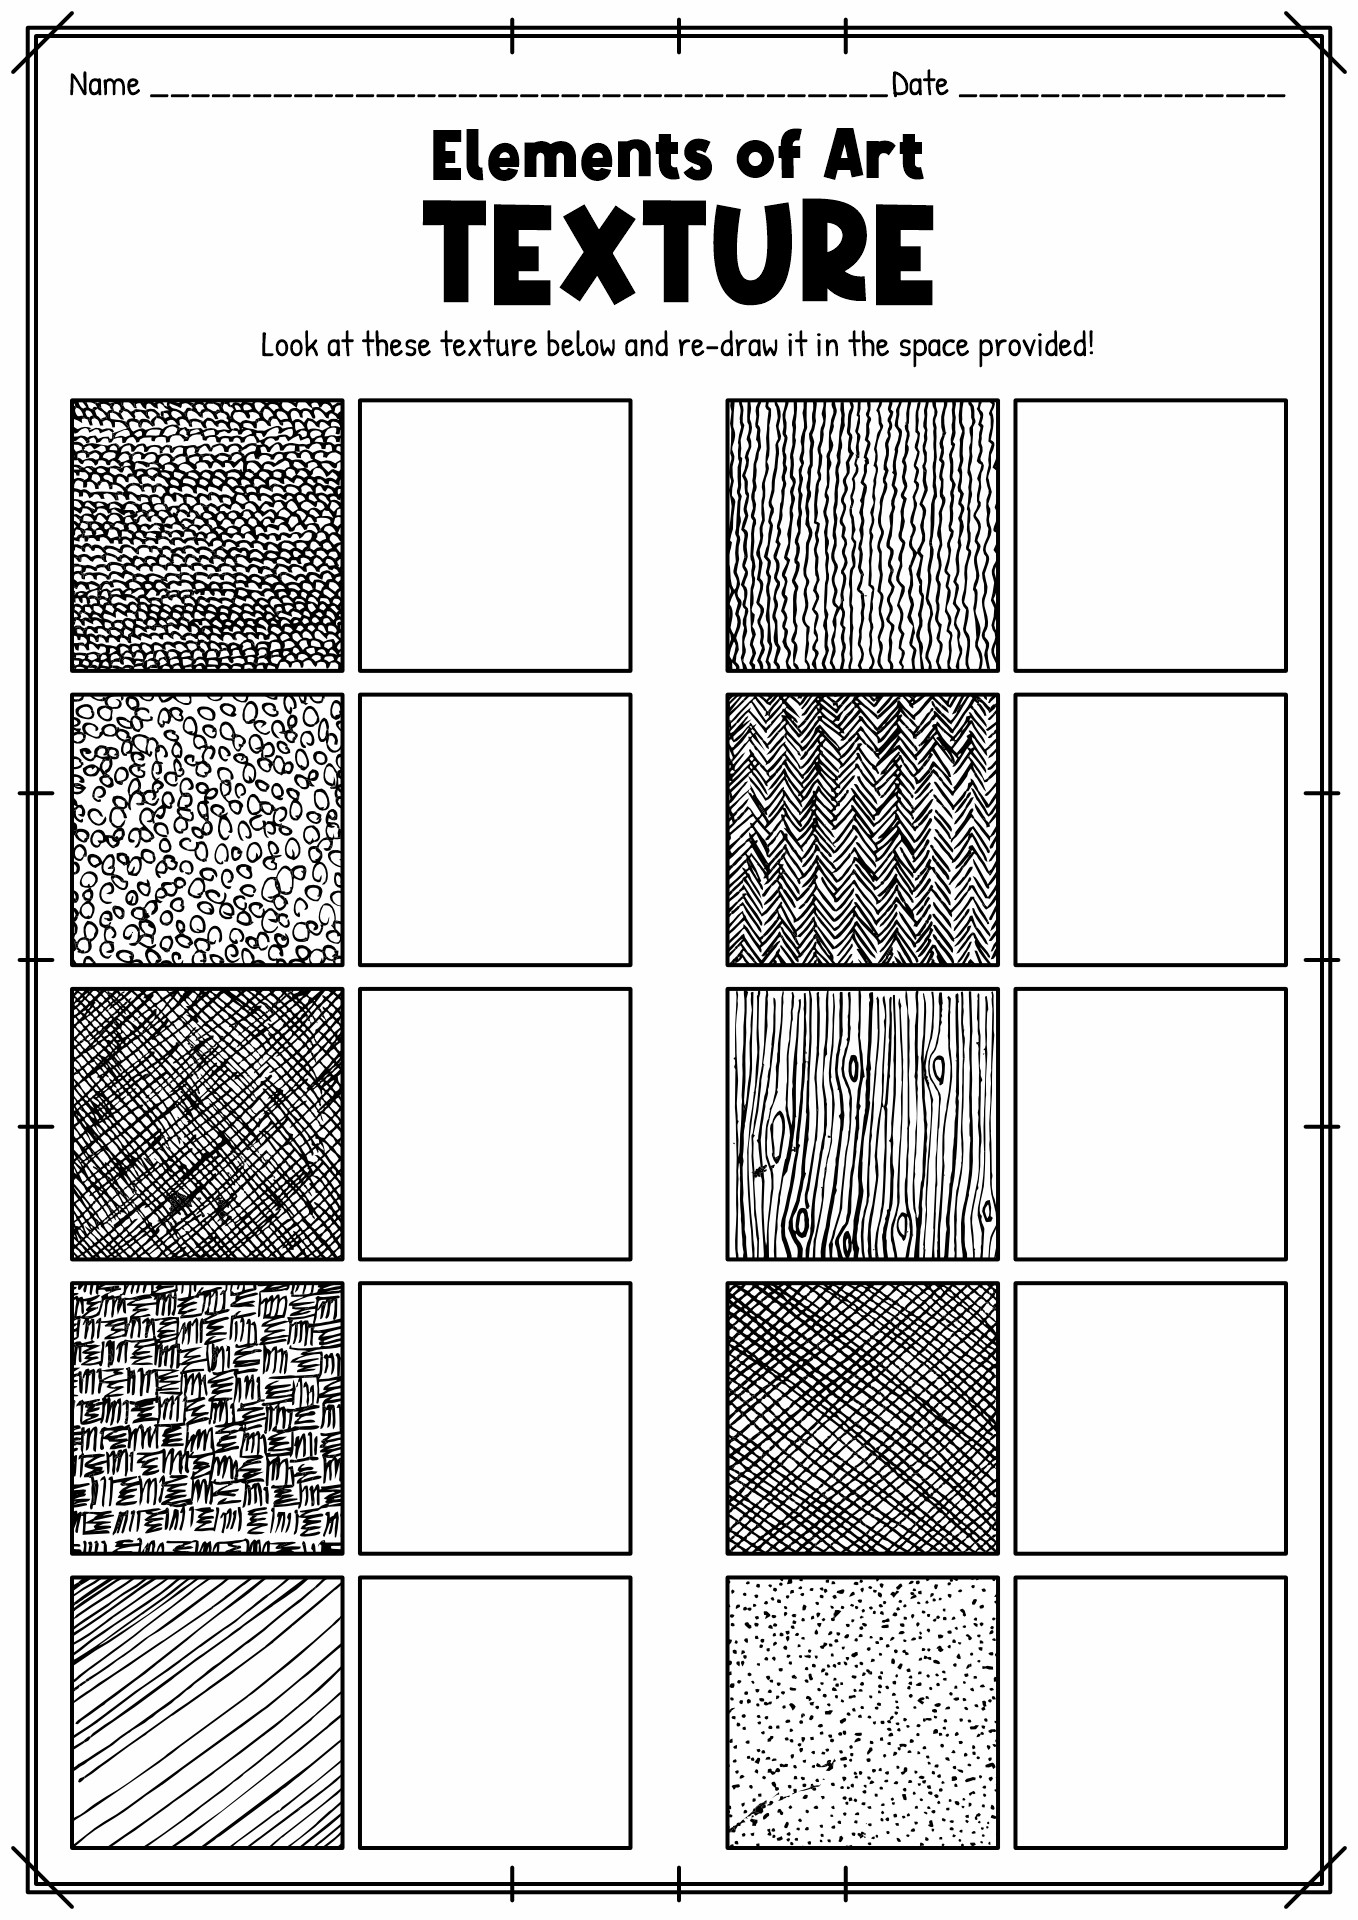 Elements of Art Texture Hand Out